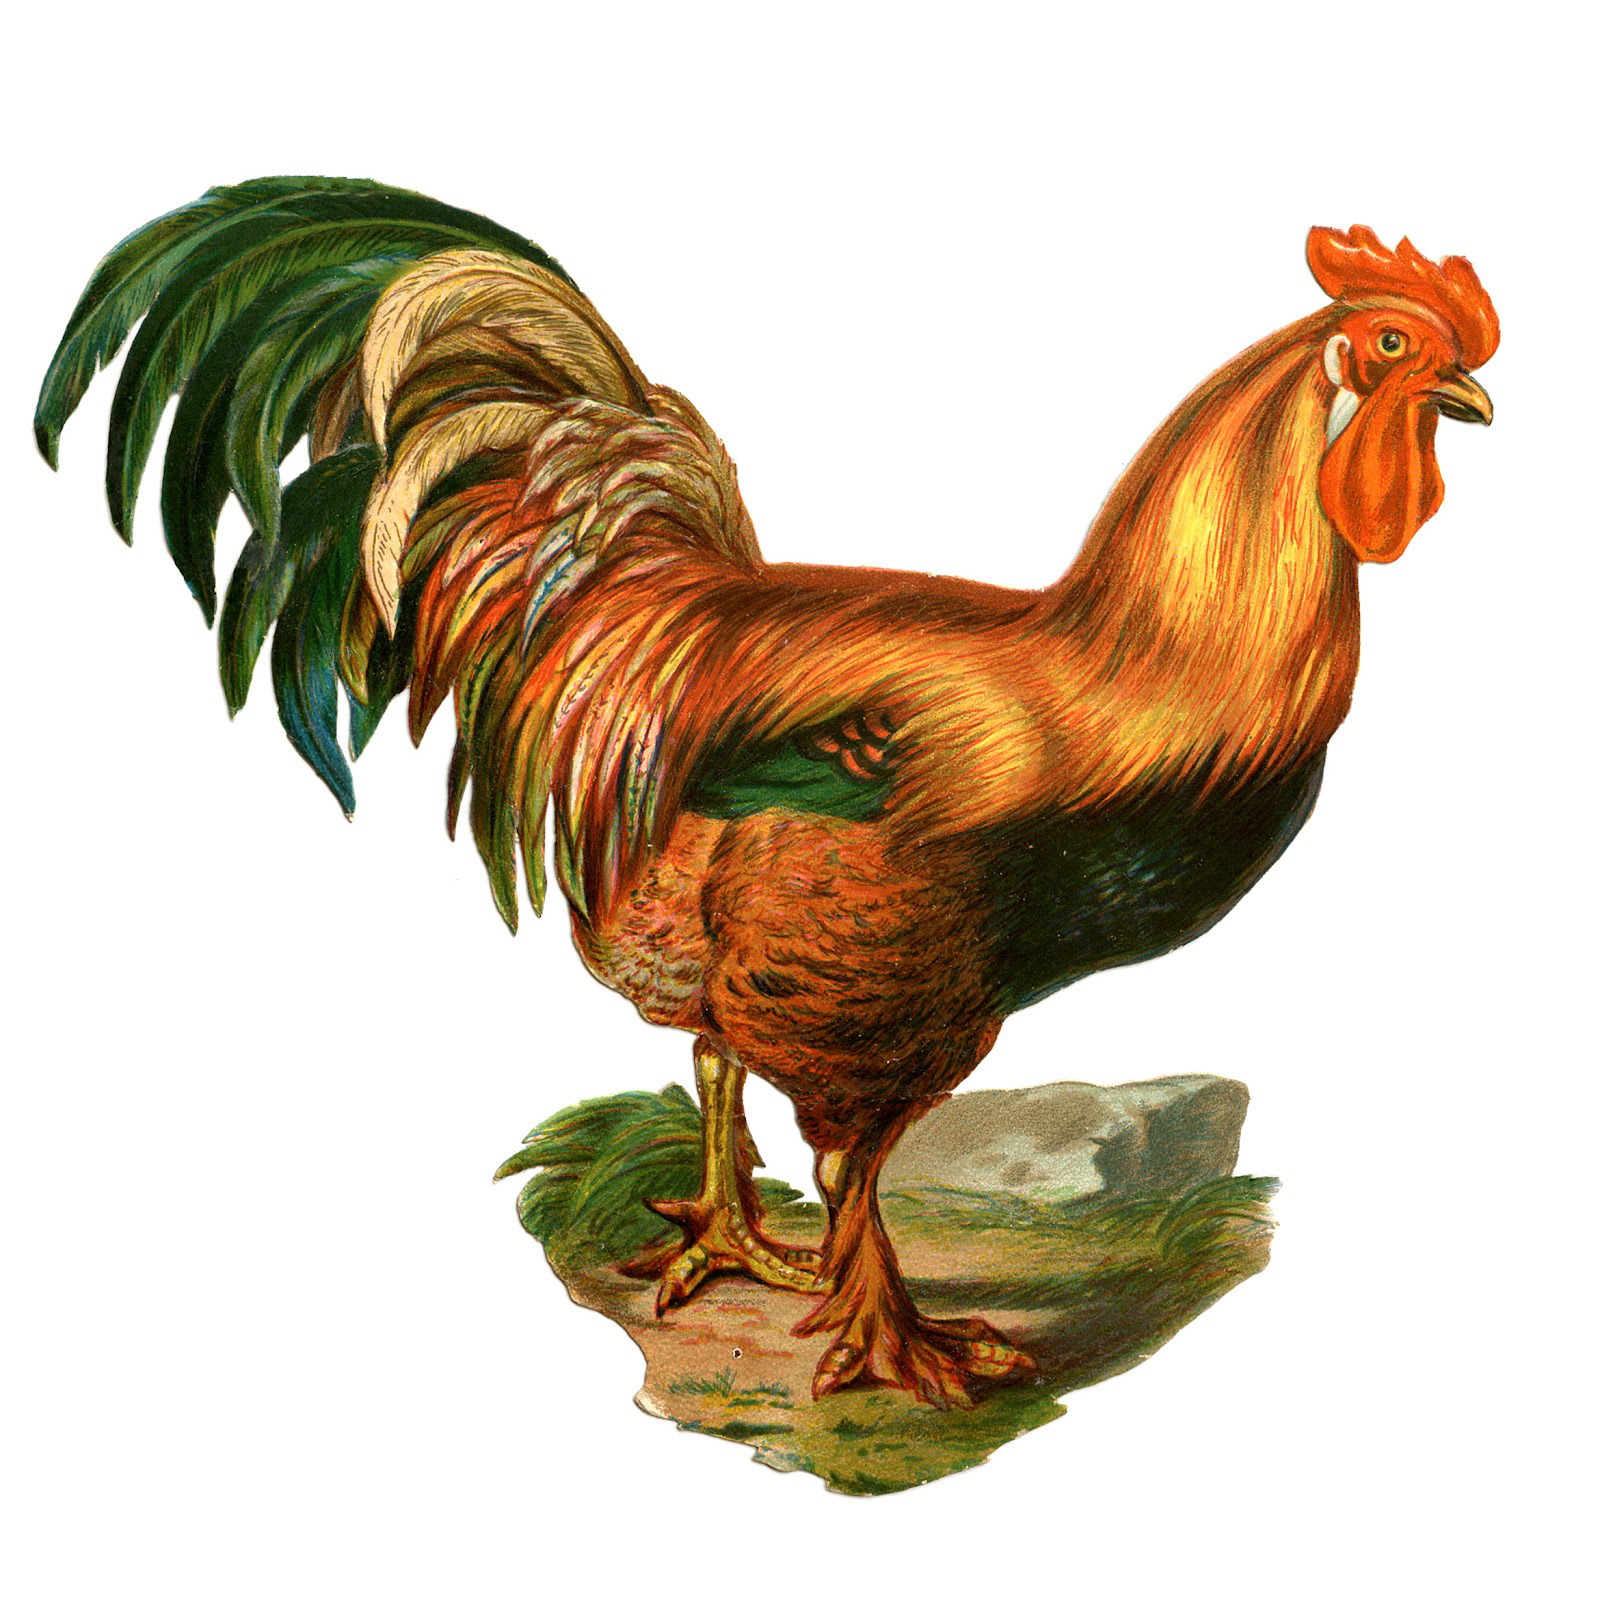 rooster-Image-Graphics-Fairy006